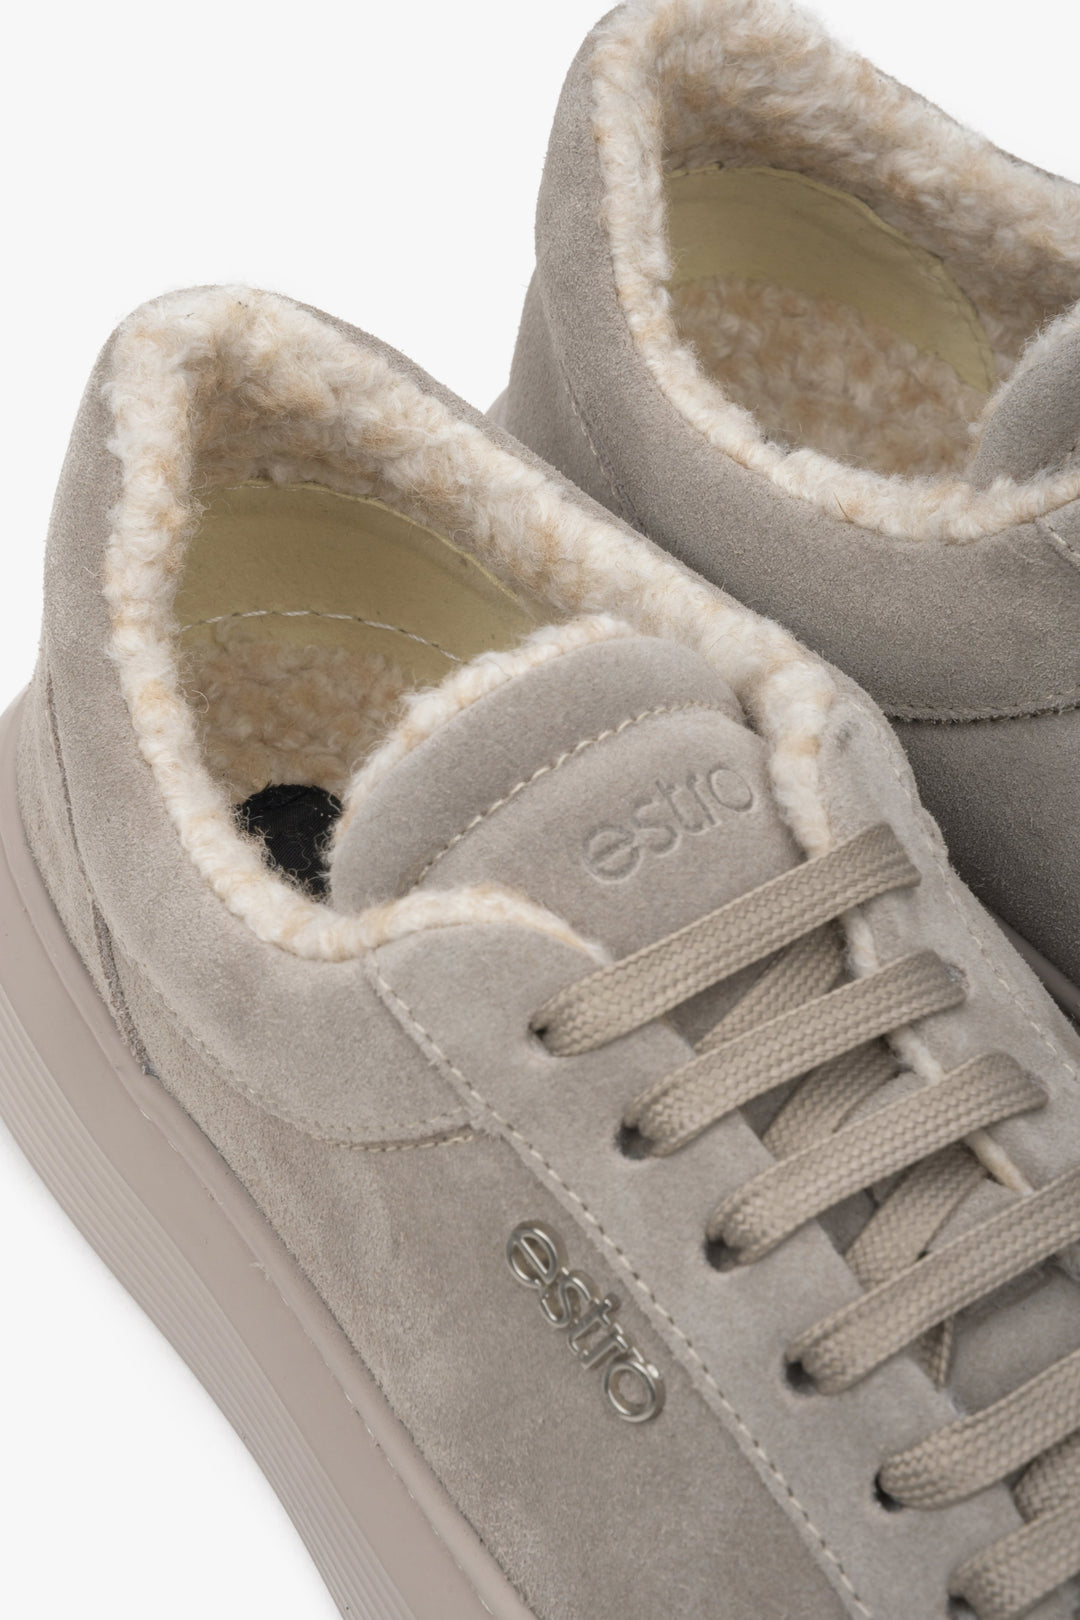 Grey, insulated low-top sneakers made of genuine Italian suede - close-up on details.